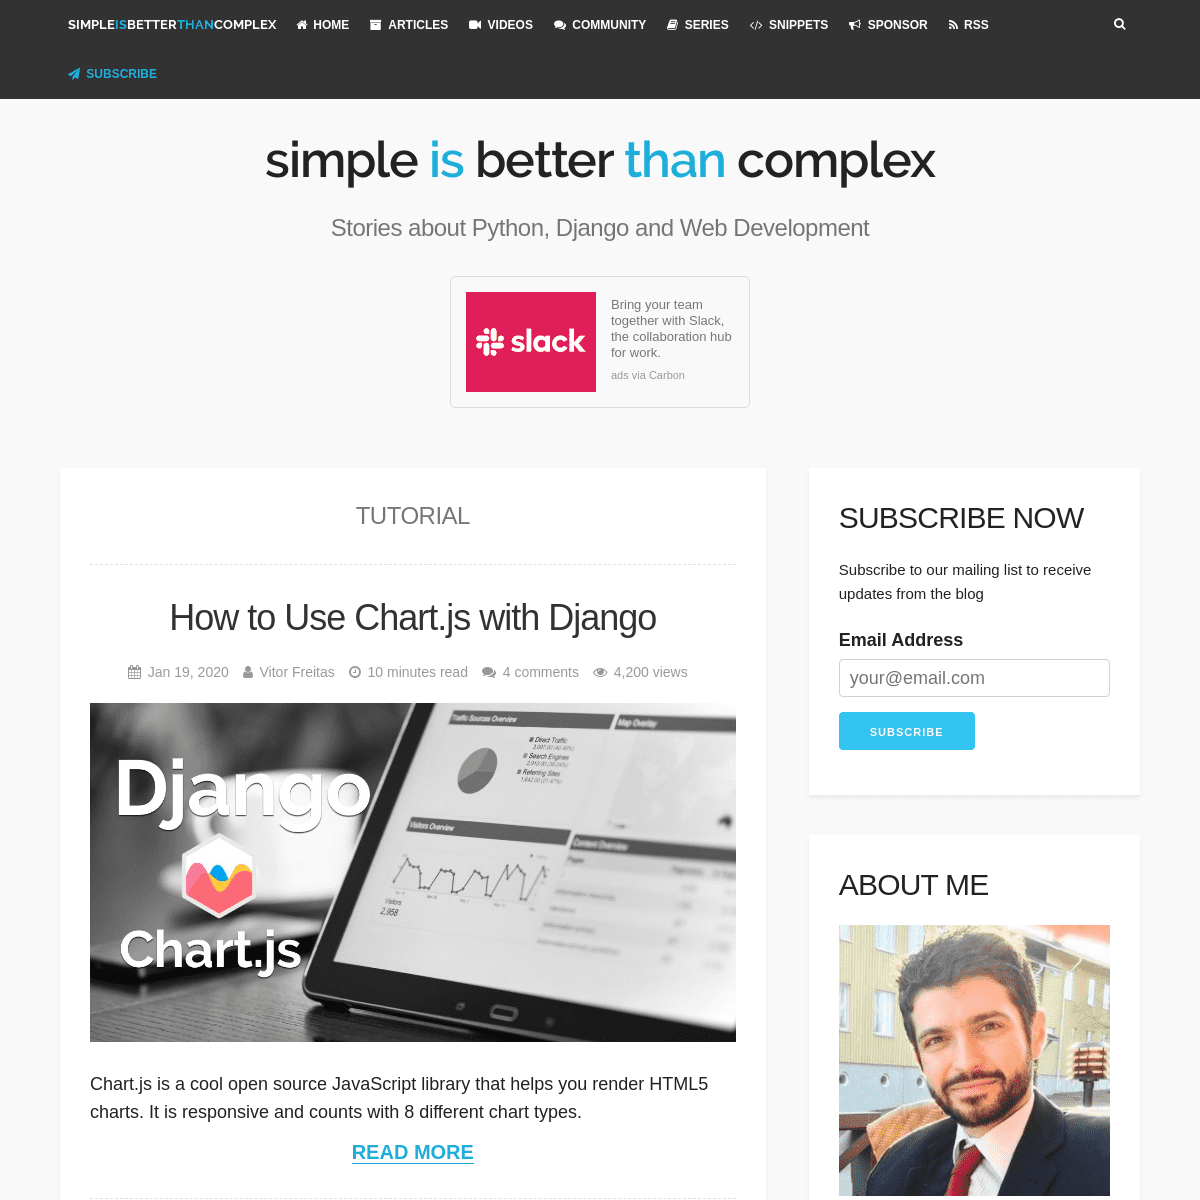 A complete backup of simpleisbetterthancomplex.com